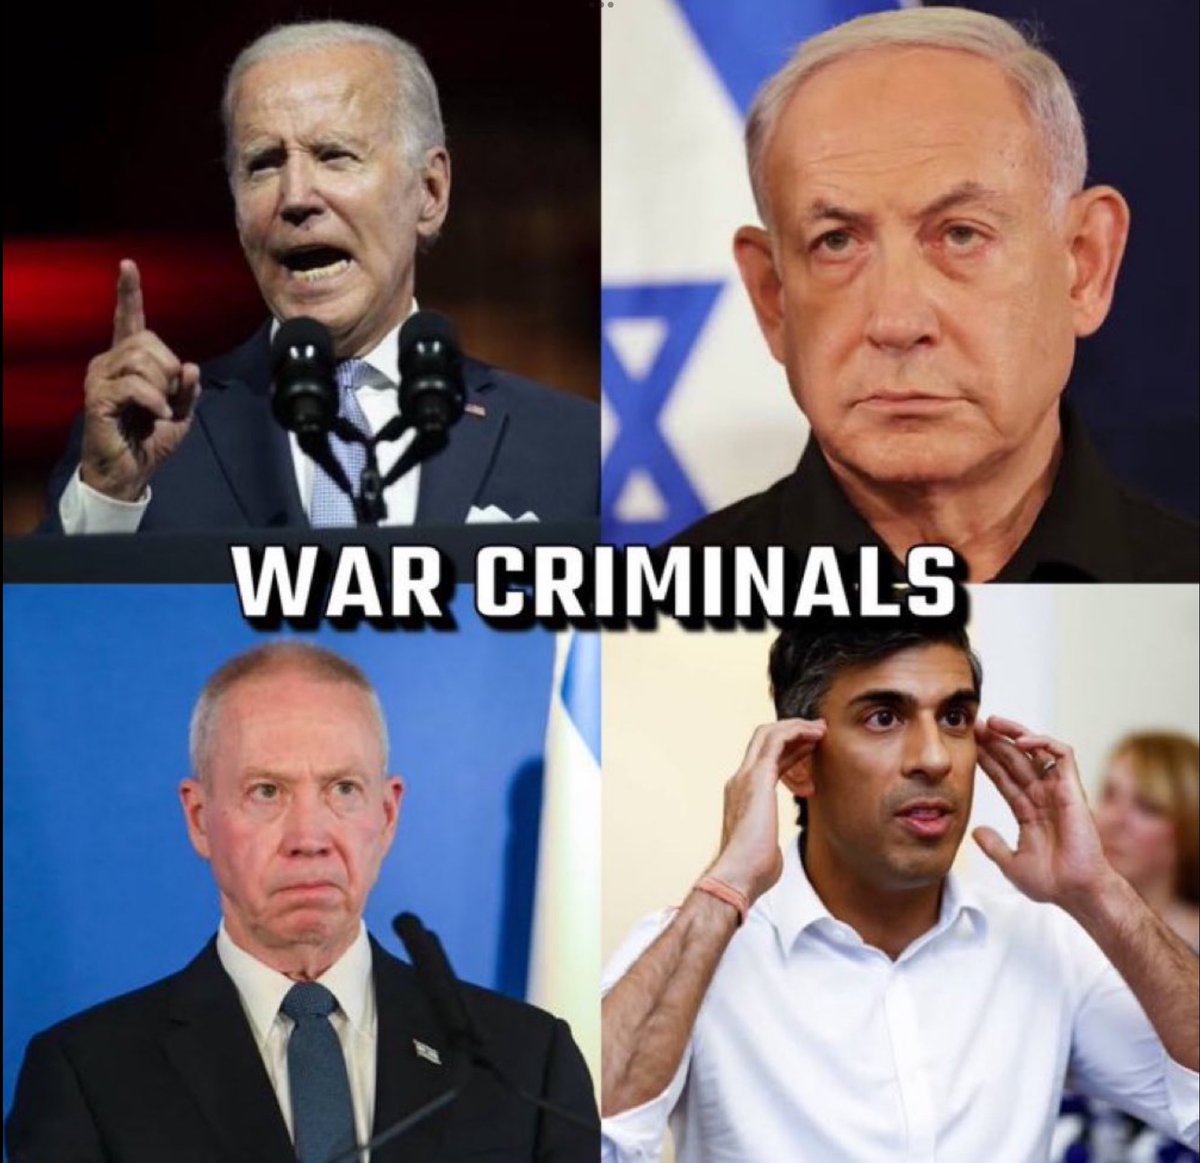 Lying fascist Netanyahu has NO interest in Israeli hostages. His single objective is to wipe out Palestinians for eventual Israeli settling of Gaza, then the West Bank. And the US, UK and other supporters of Israeli fascism have probably known this from the beginning.